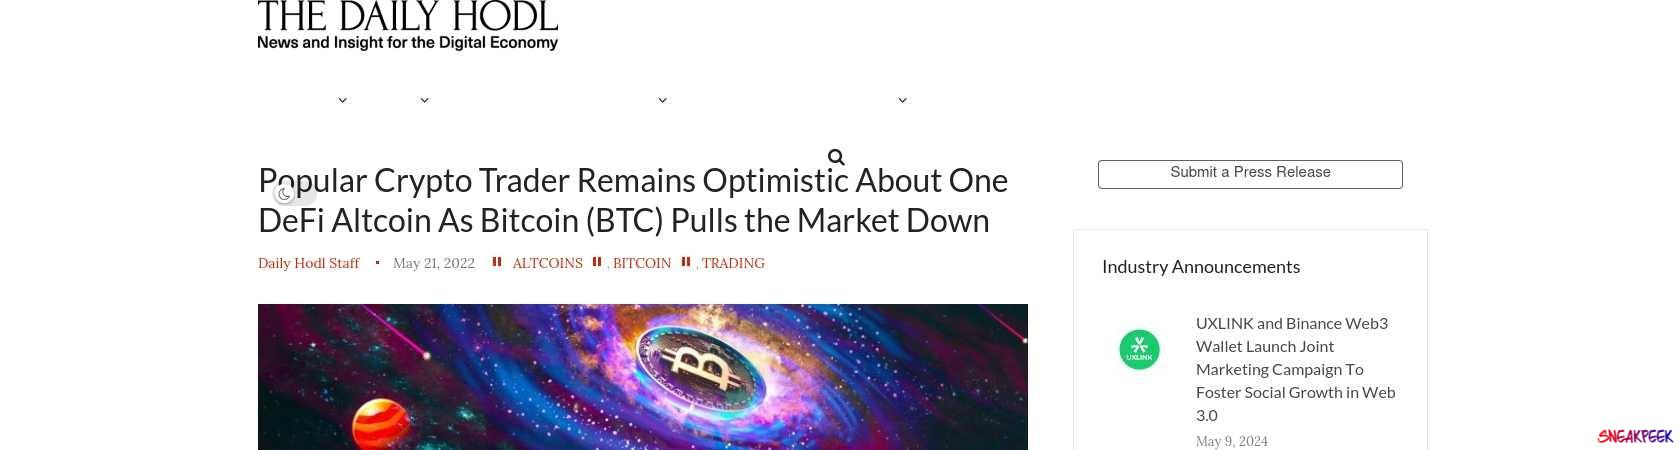 Read the full Article:  ⭲ Popular Crypto Trader Remains Optimistic About One DeFi Altcoin As Bitcoin (BTC) Pulls the Market Down